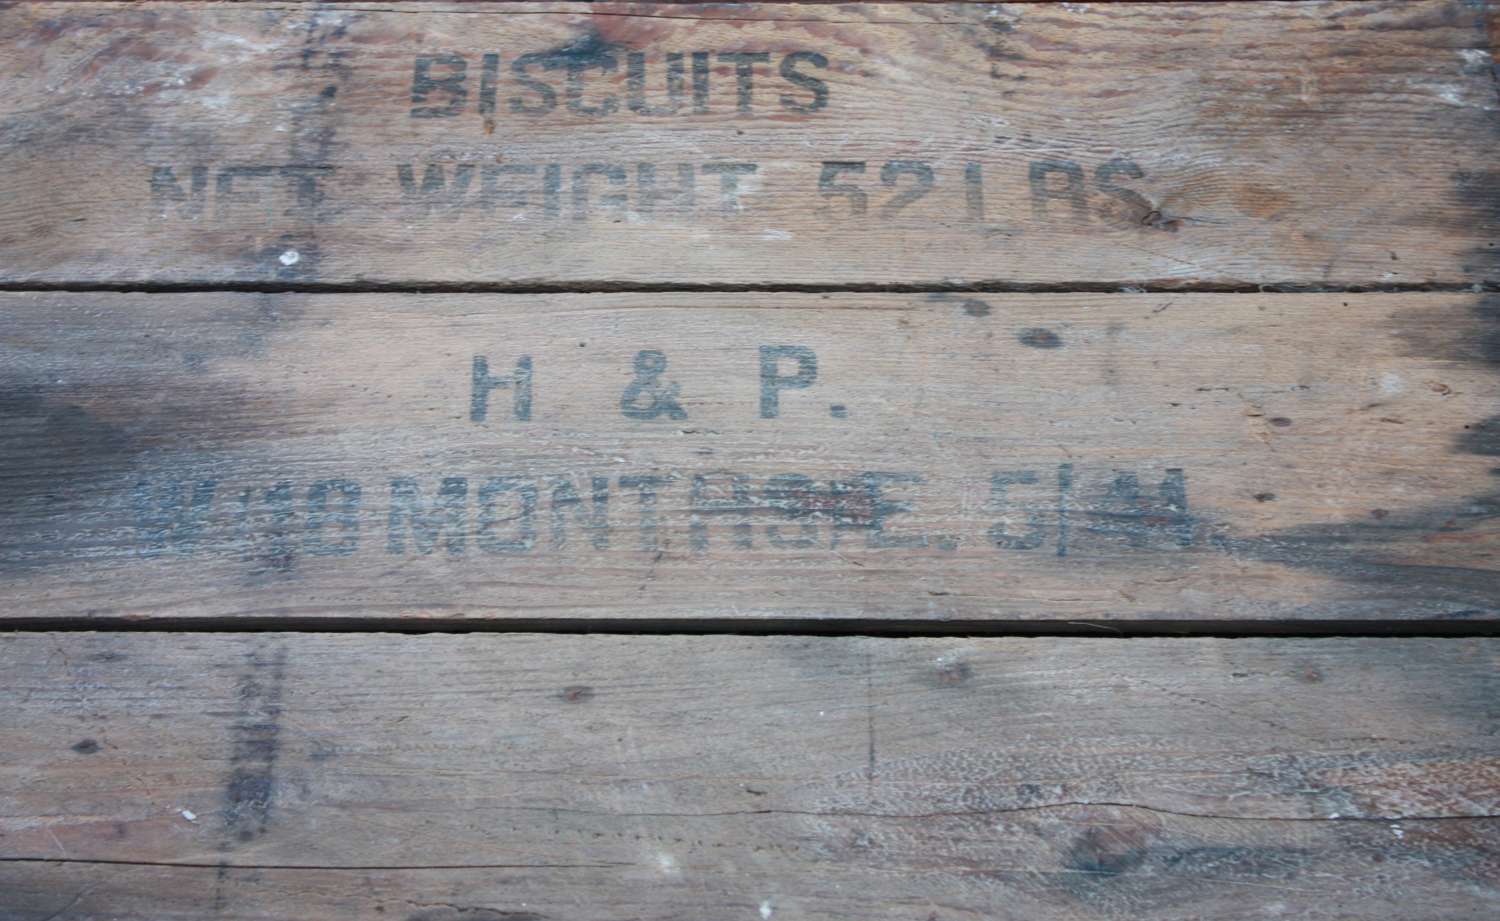 A 1944 DATED LARGE SIZE WOOD BISCUIT CREATE